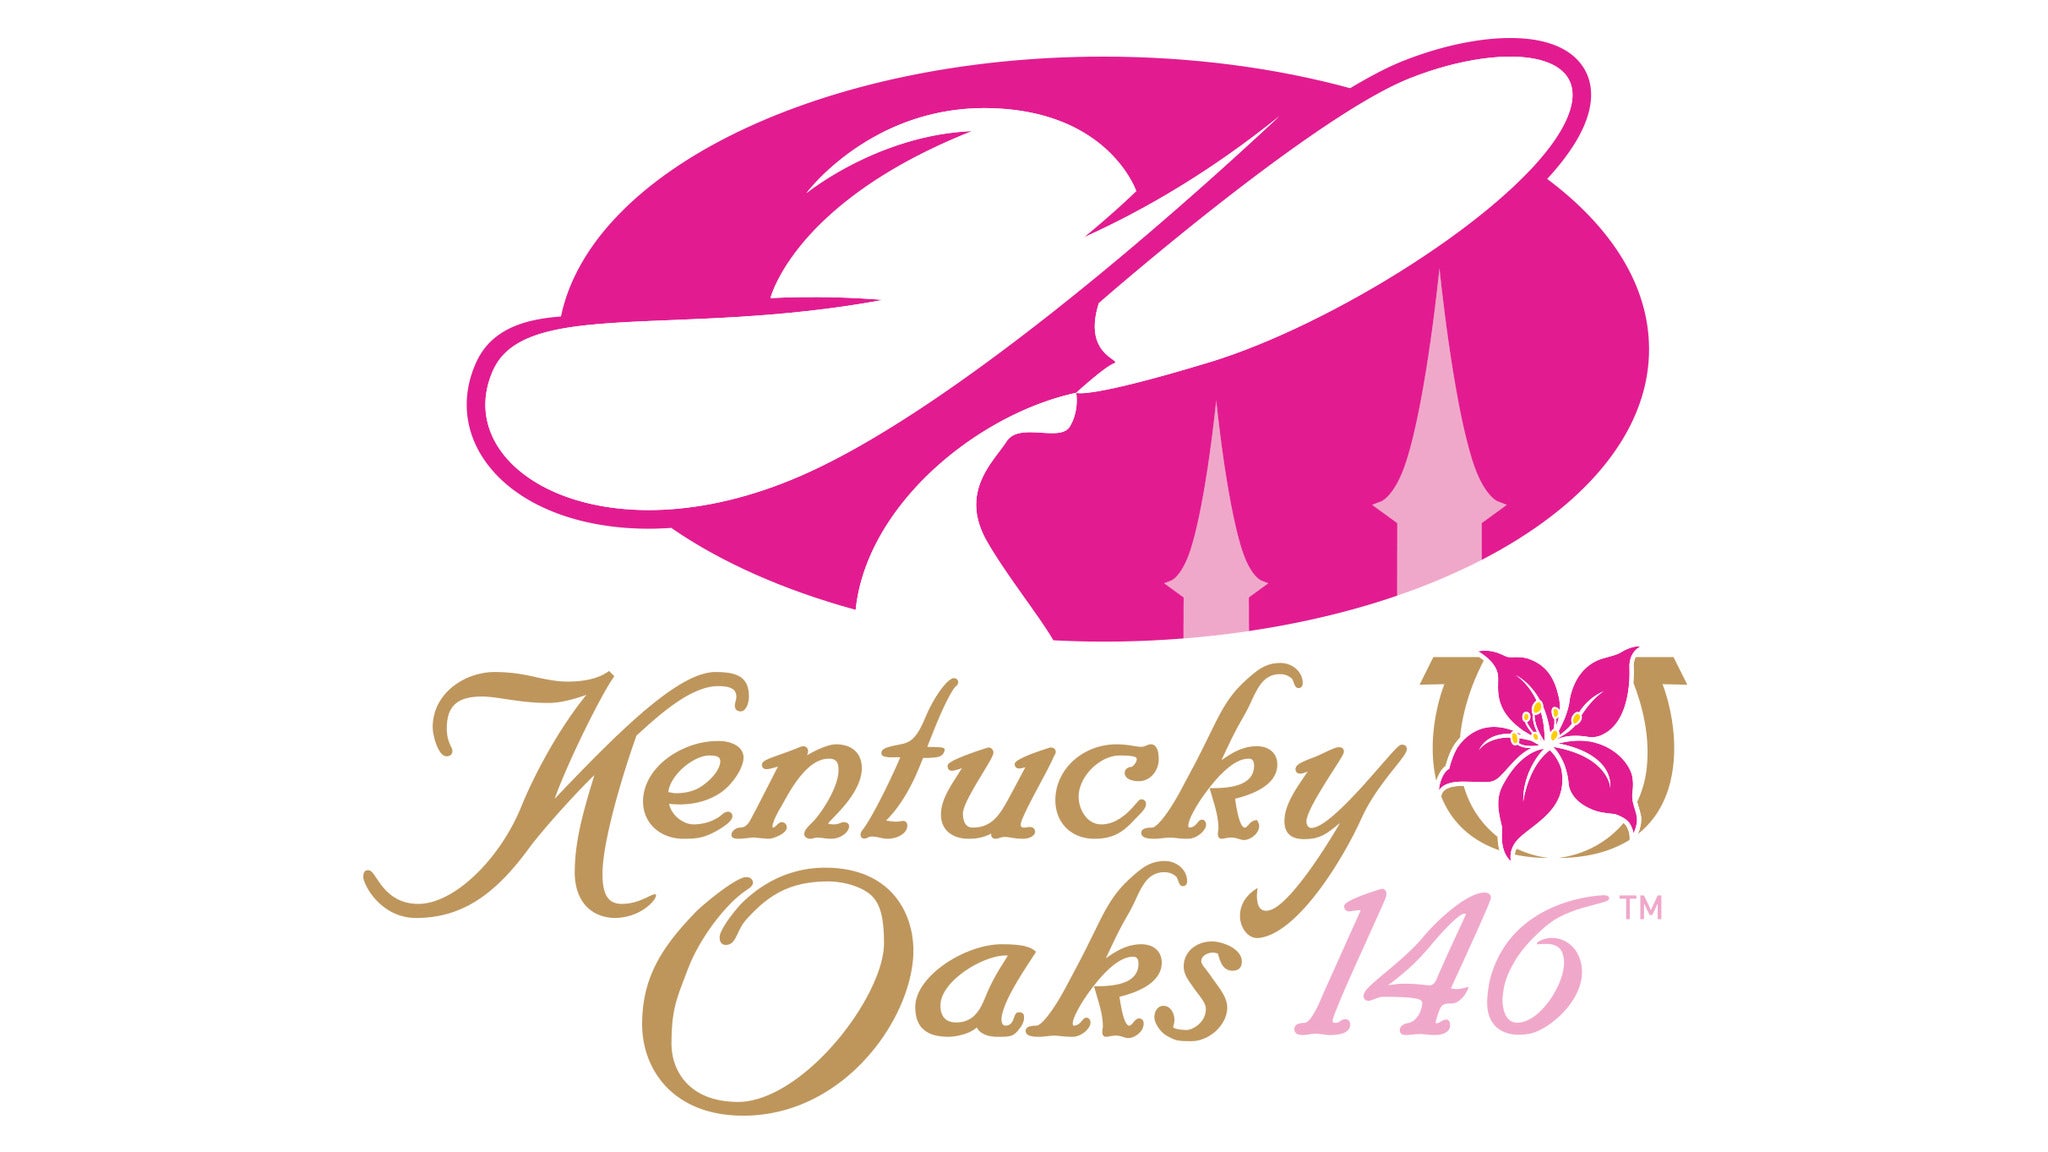 147th Kentucky Oaks - Infield General Admission *No Front Side Access* in Louisville promo photo for Advance Purchase Pricing presale offer code